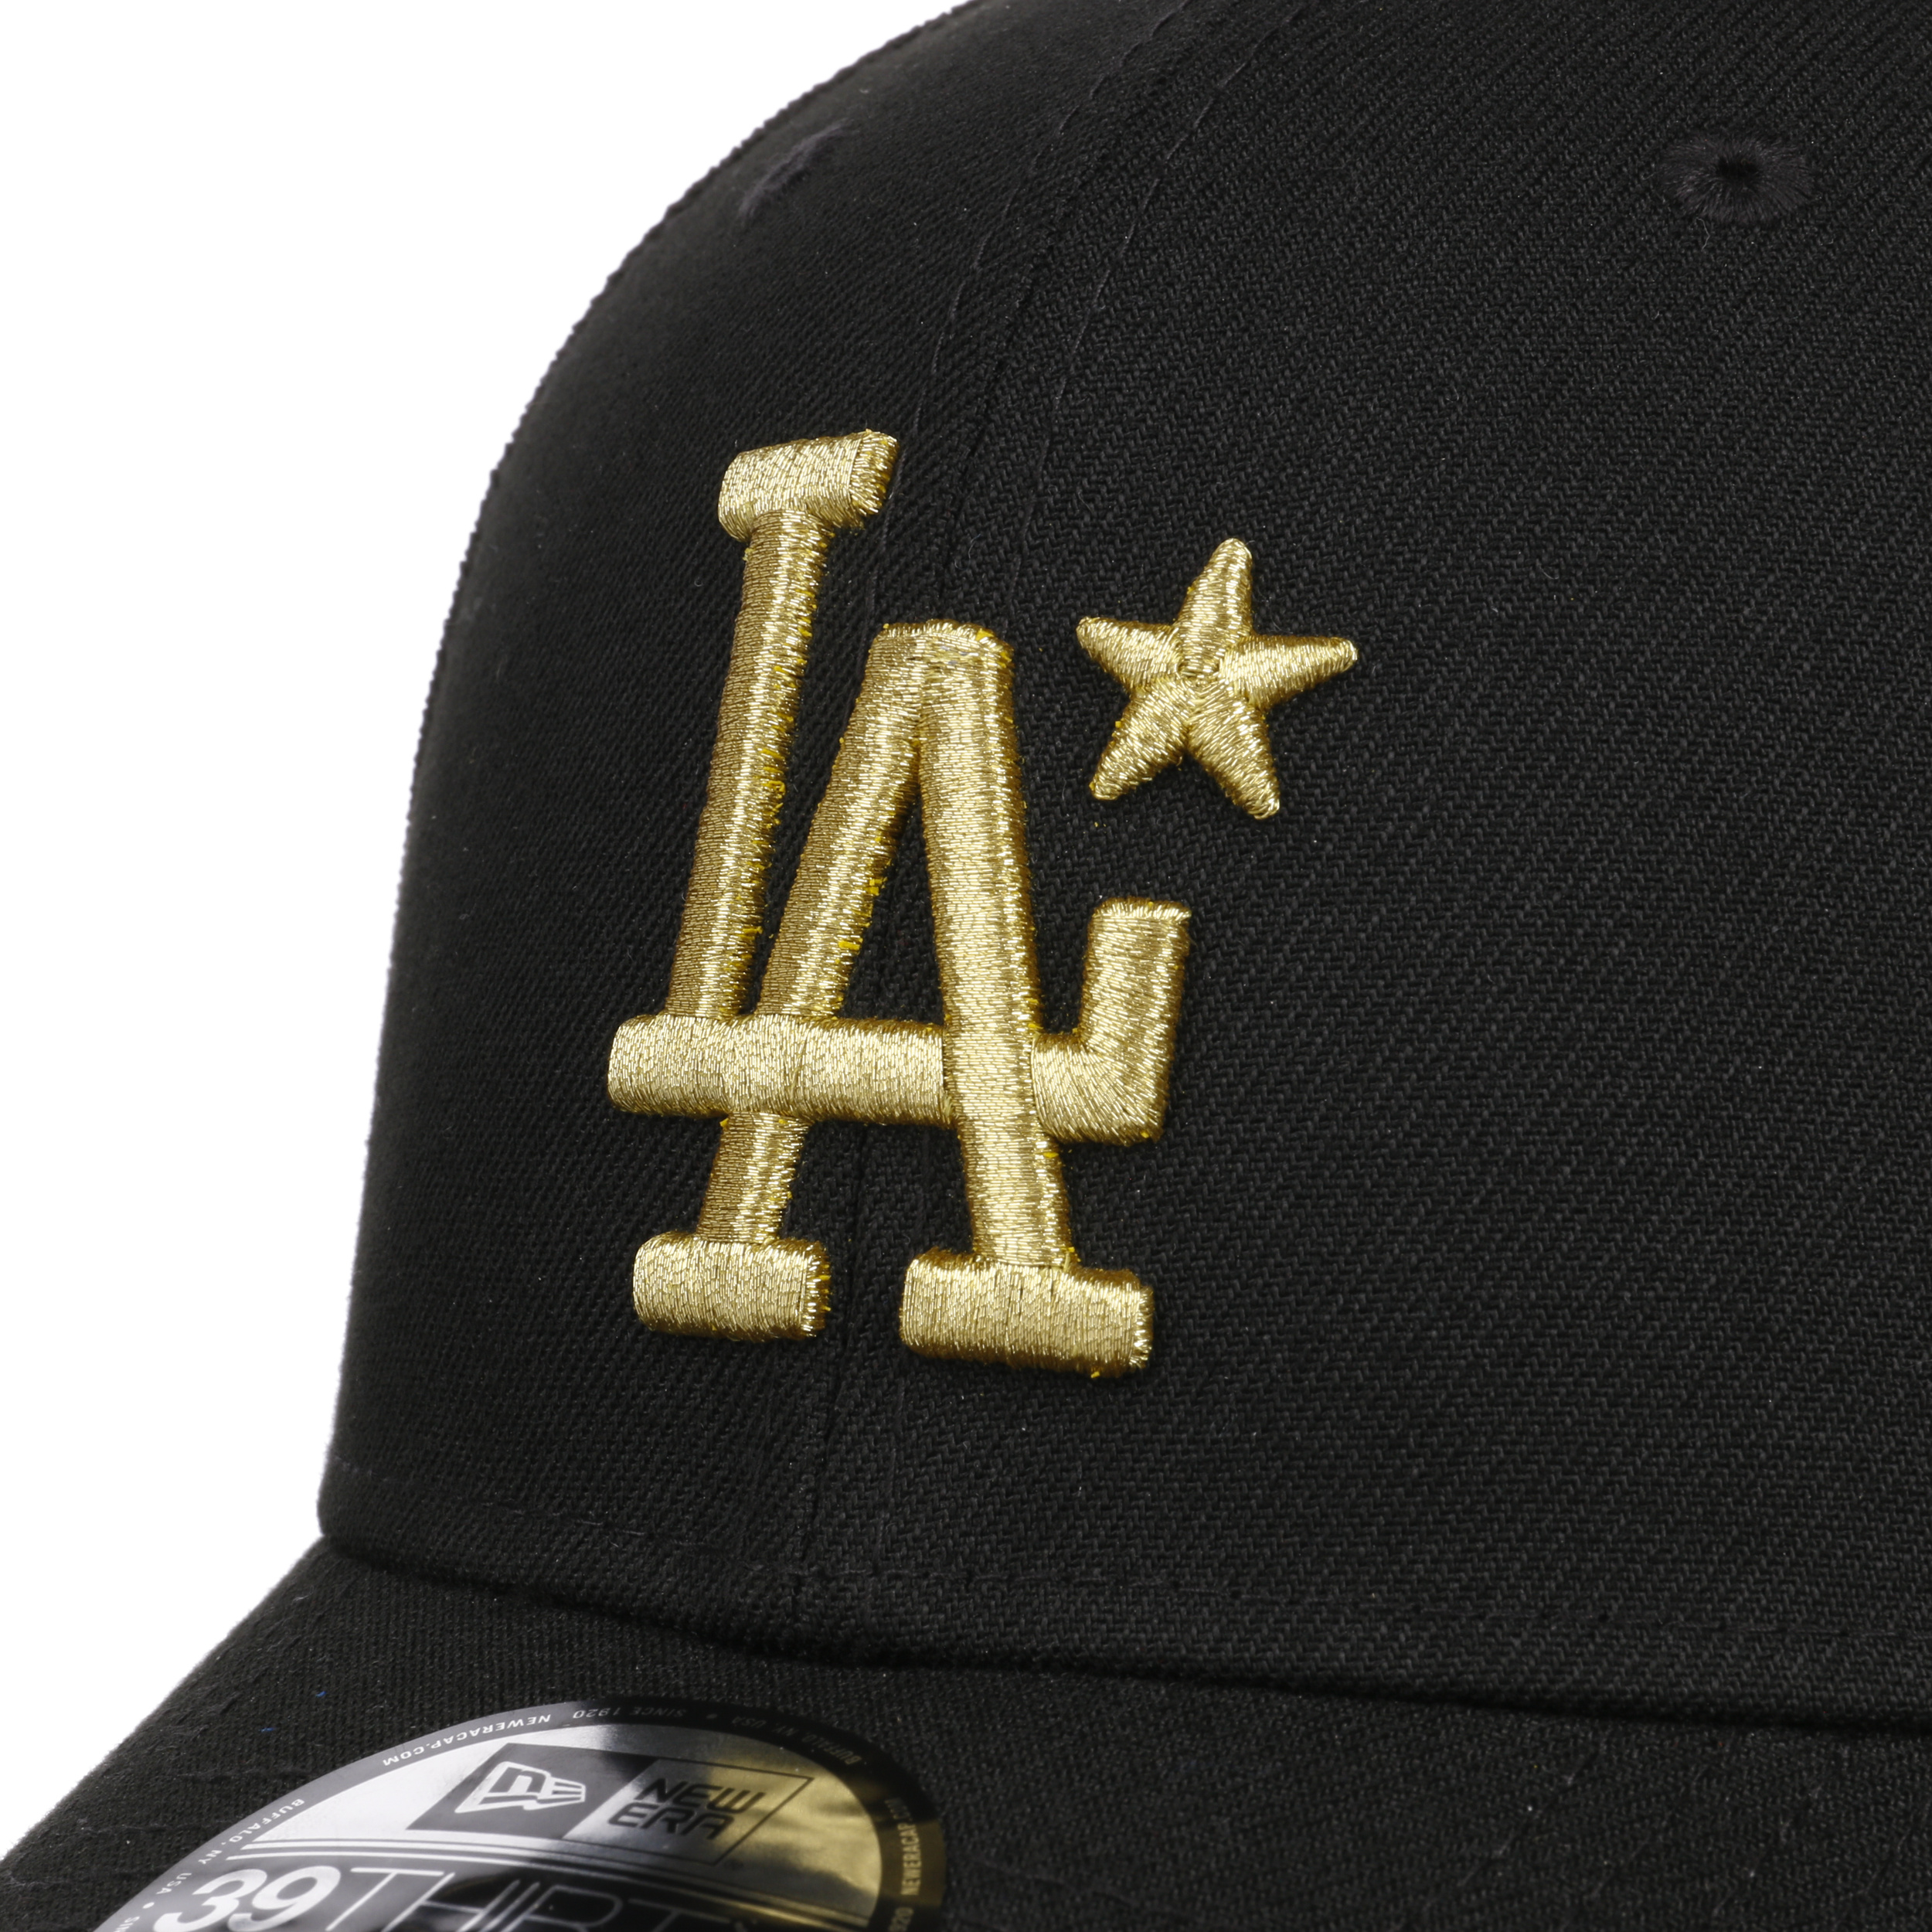 Los Angeles Dodgers Independence Day 2023 39THIRTY Stretch Fit Hat, Blue - Size: S/M, MLB by New Era